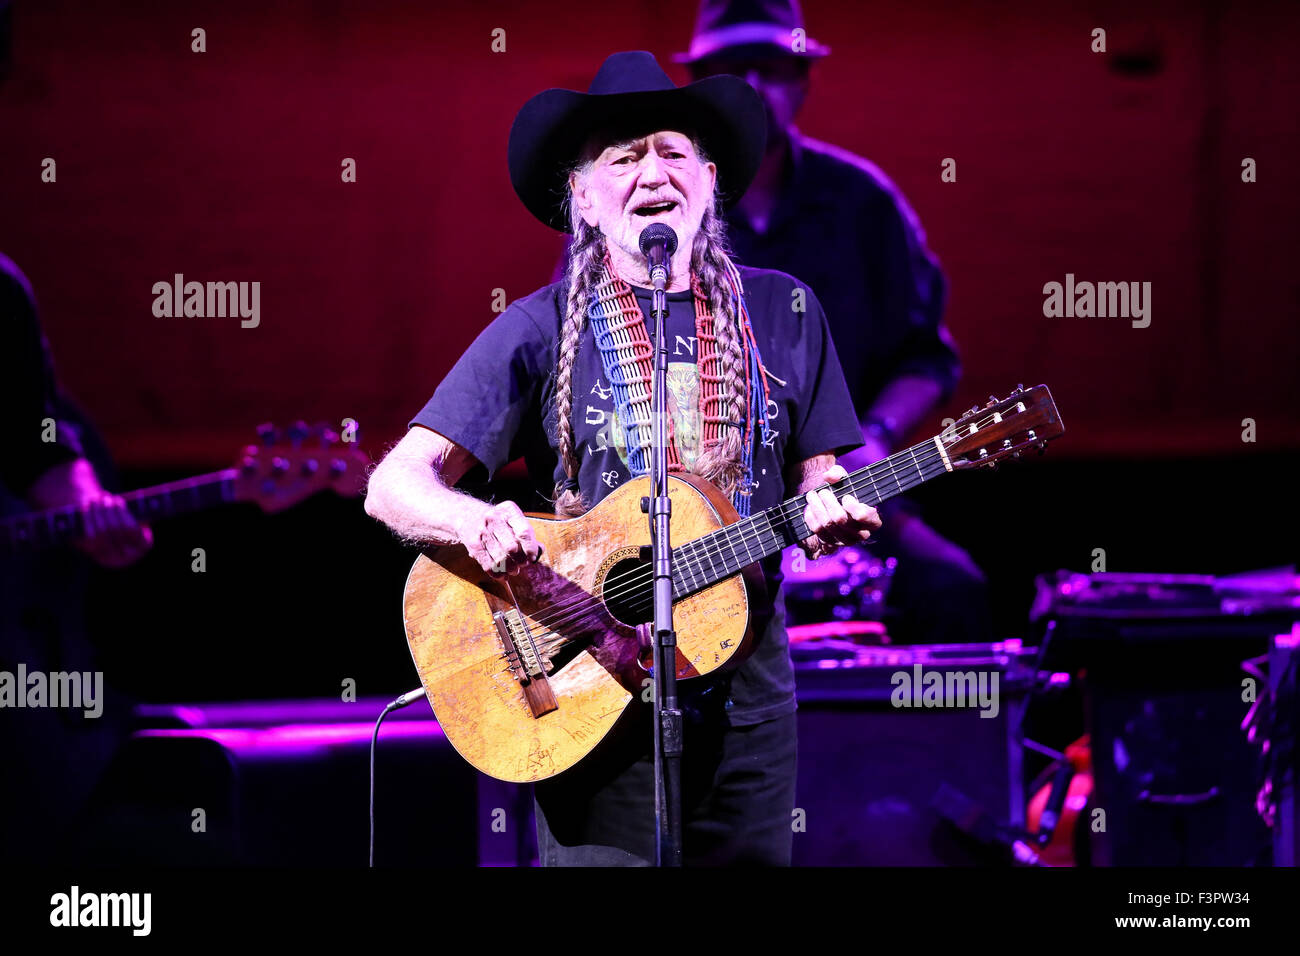 Music artist WILLIE NELSON brings his 2014 Summer Tour to Cary, NC.  Willie Hugh Nelson (born April 29, 1933) is an American country music singer-songwriter, as well as an author, poet, actor, and activist. Stock Photo